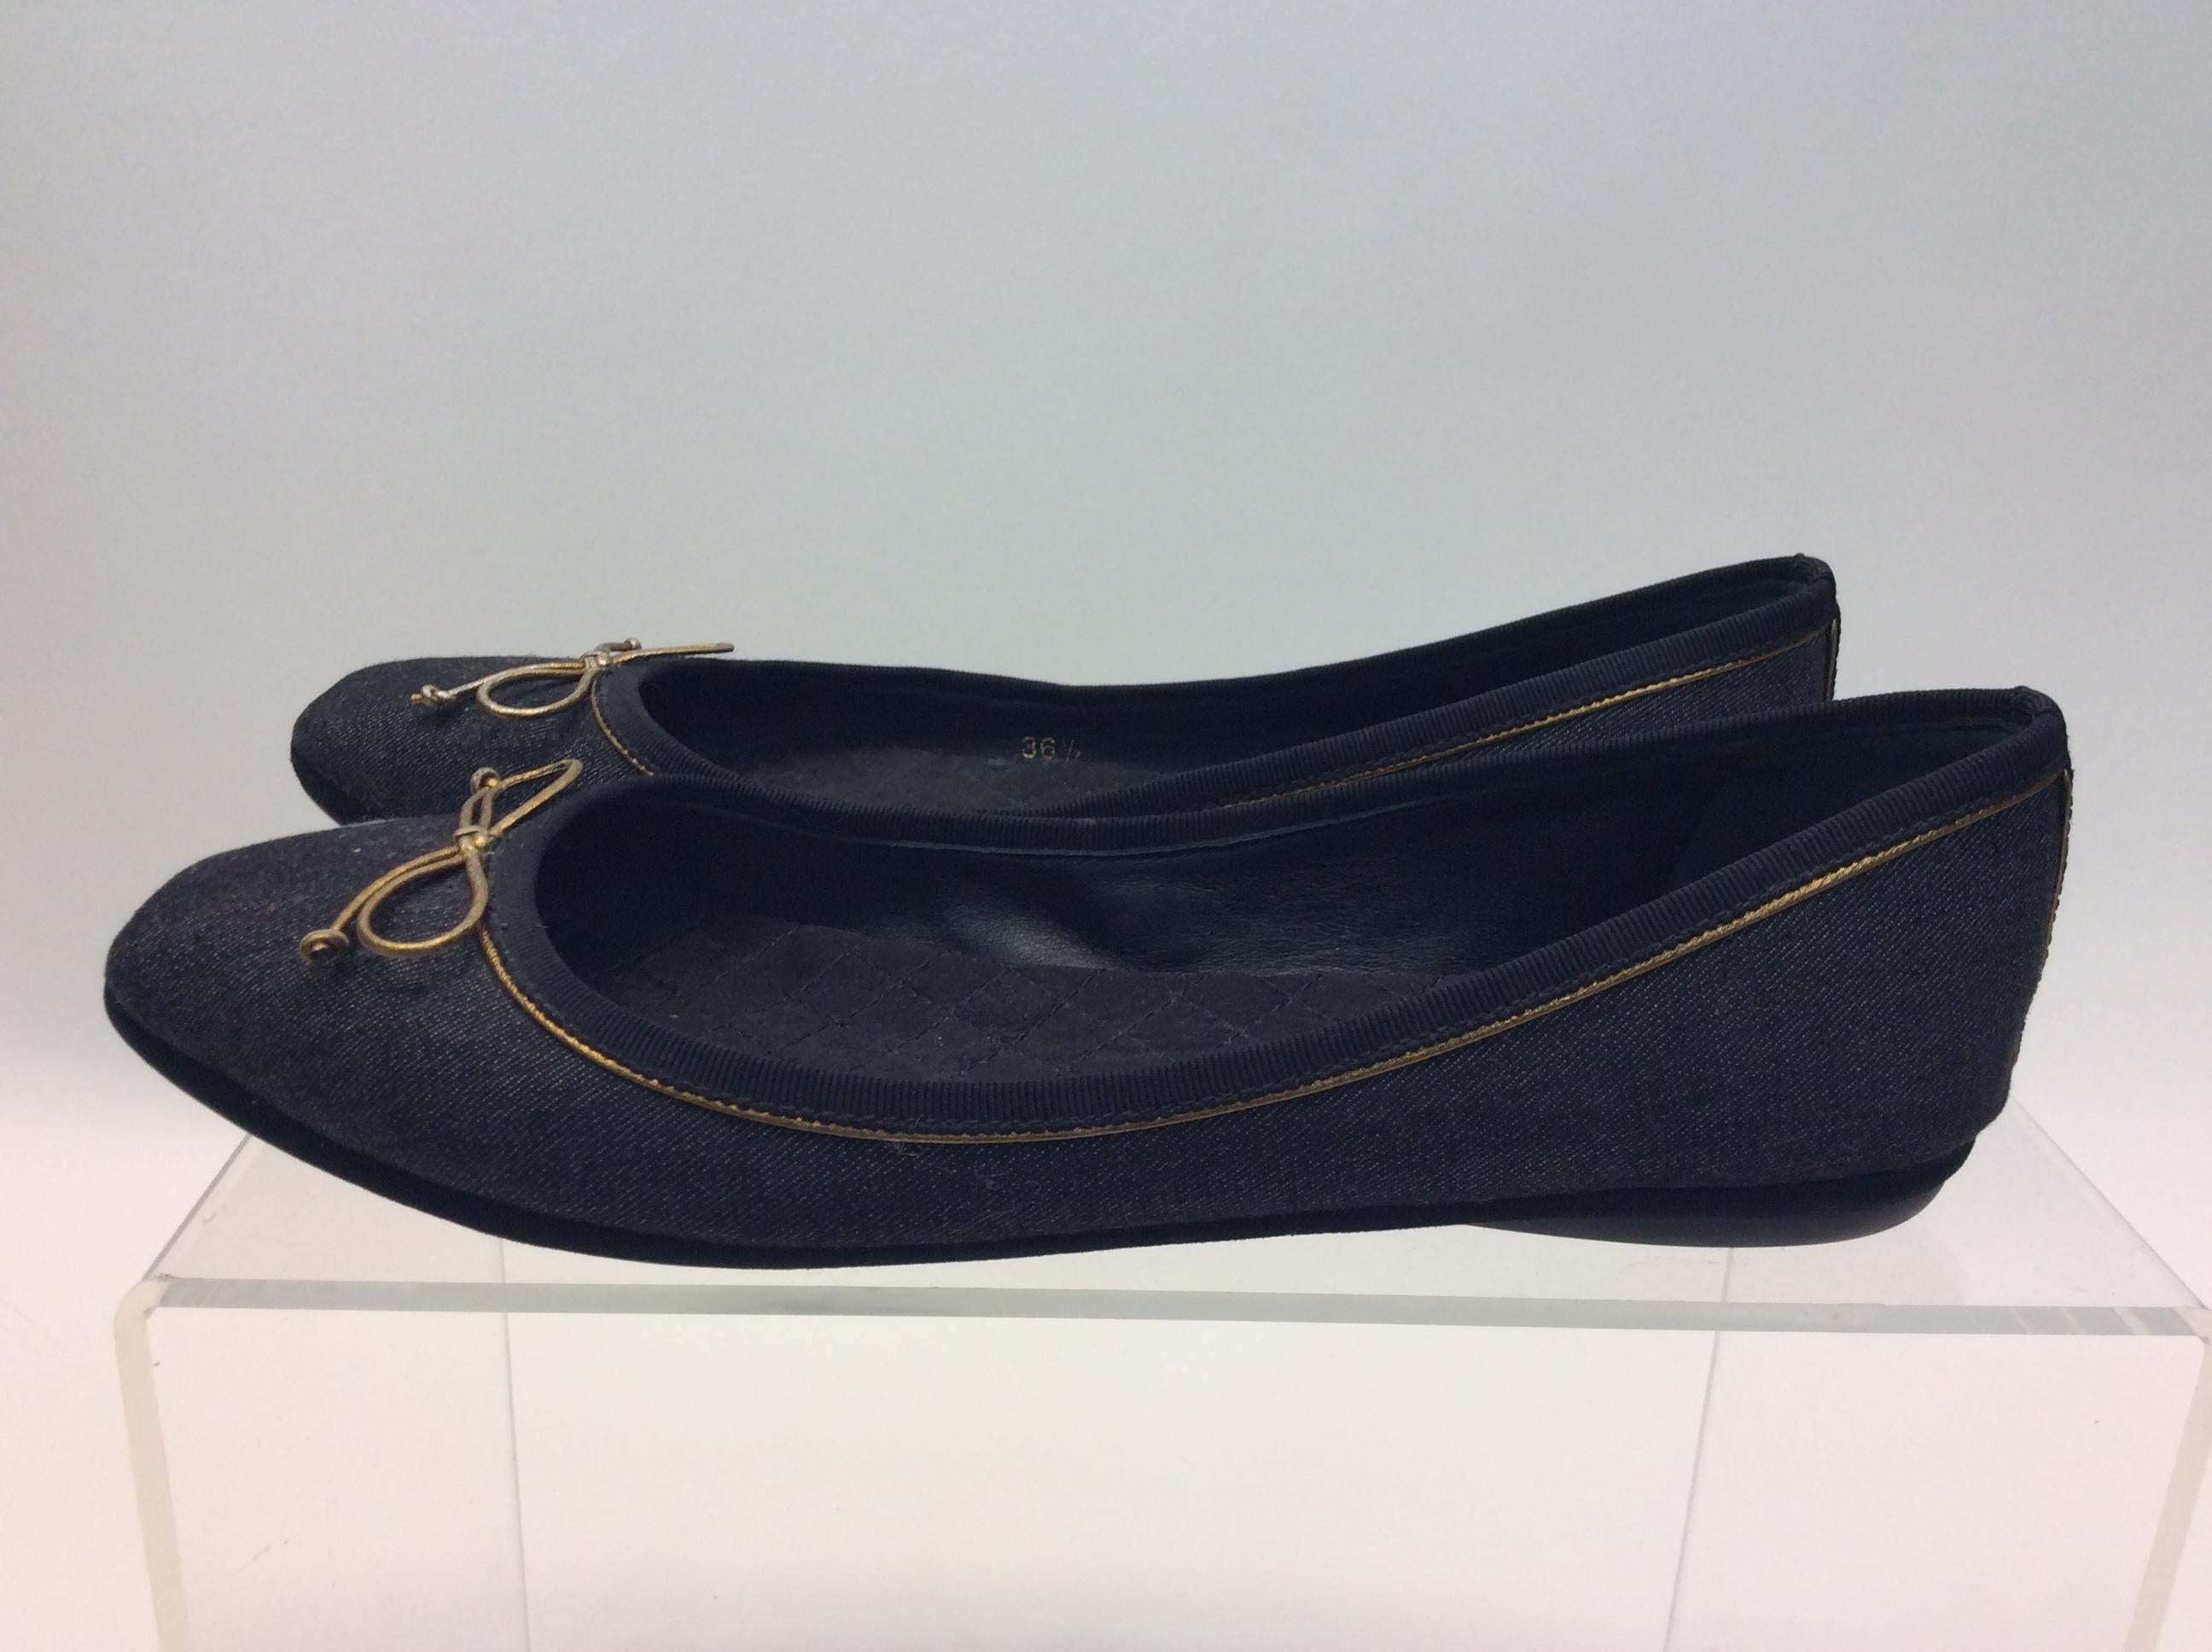 Yves Saint Laurent Black Ballet Flats
$165
Made in Italy
Size 36.5